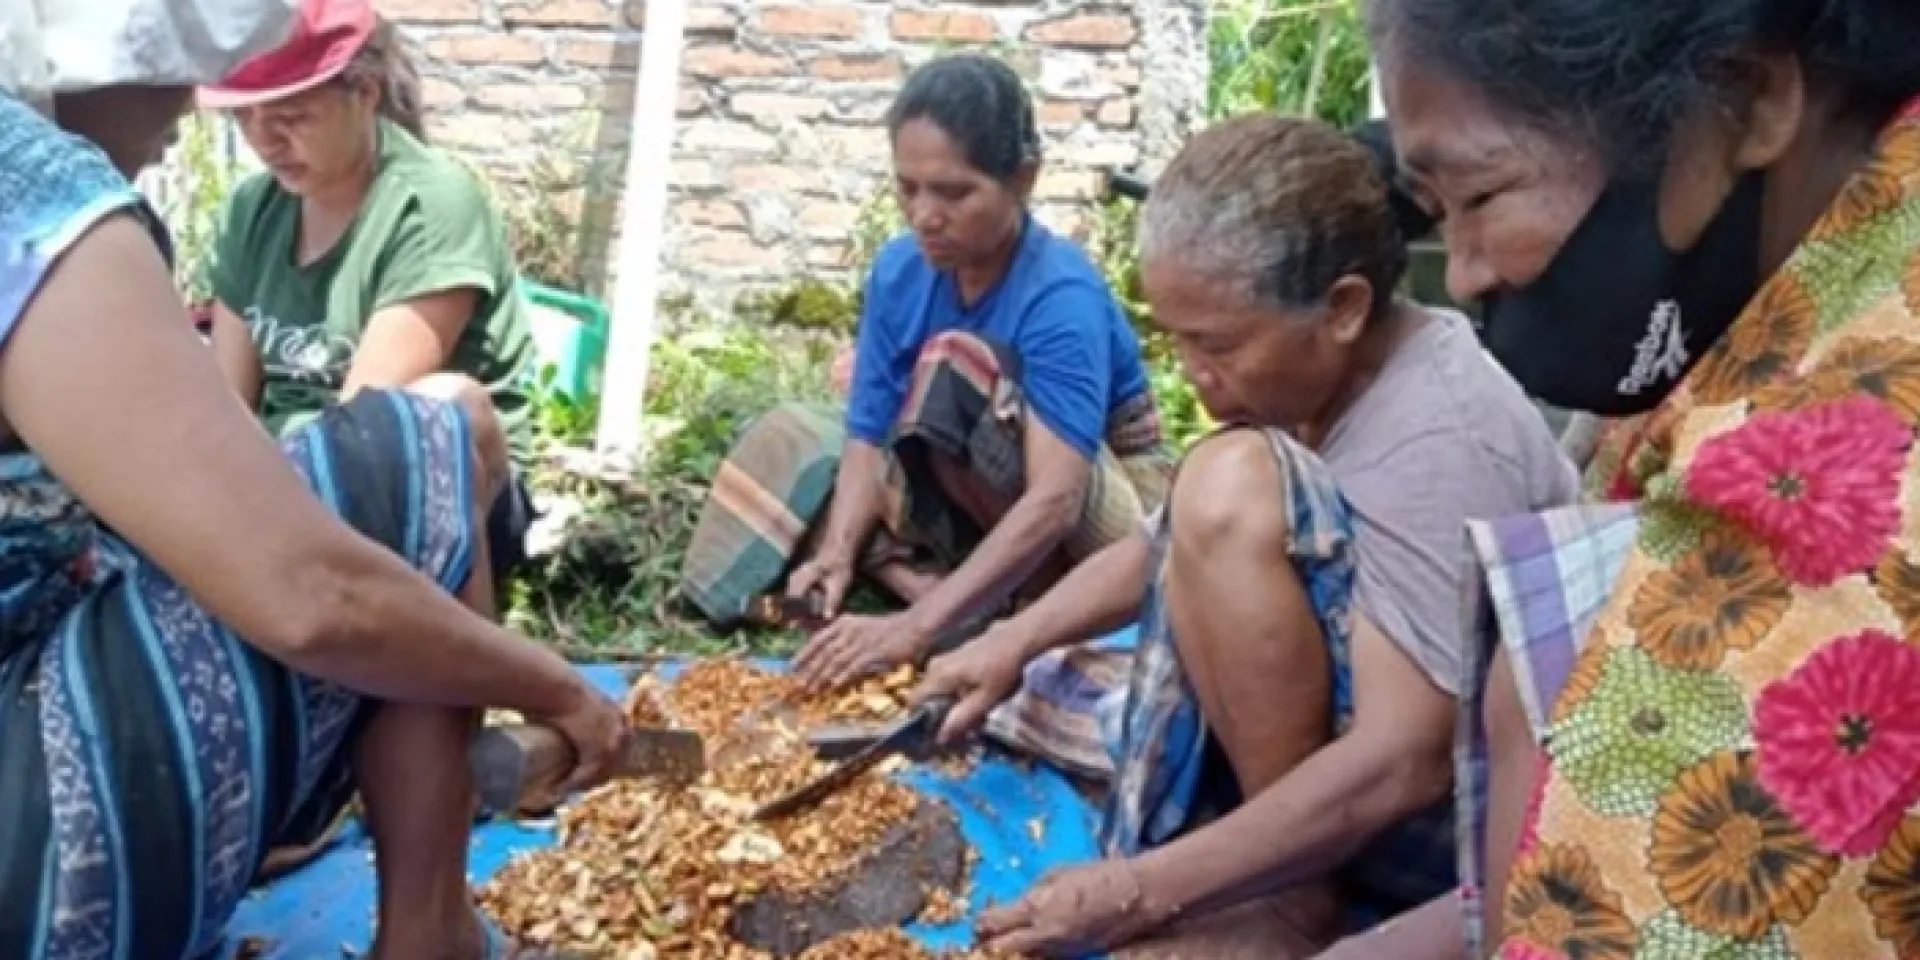 The women’s group chops cocoa pods before fermenting the pods into fertilizer.